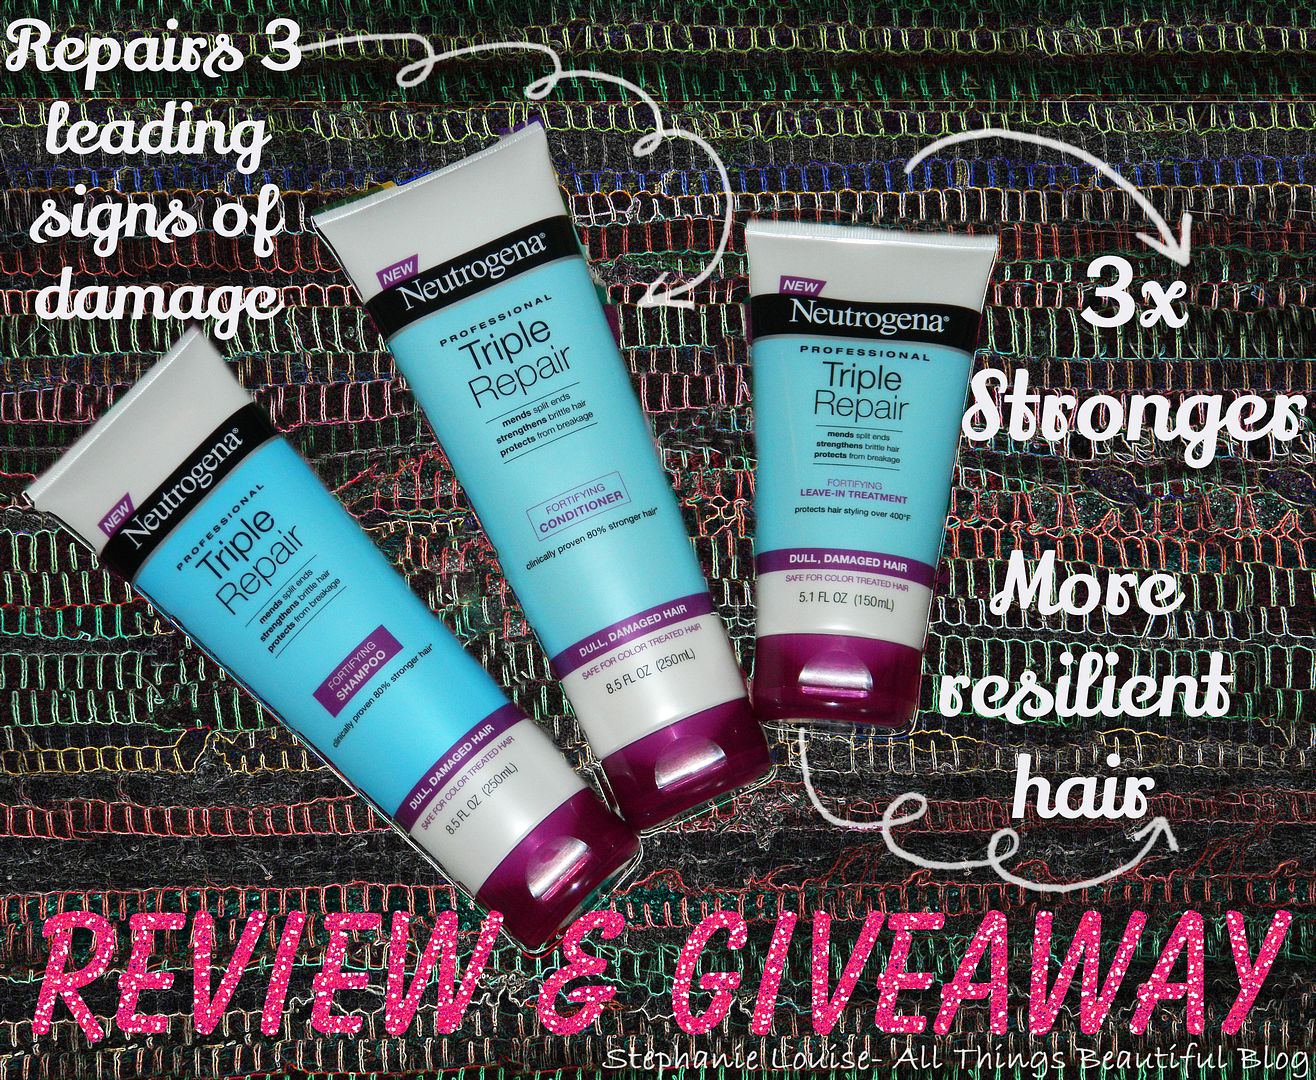 Neutrogena Professional Triple Repair Hair Shampoo Conditioner & Leave-In Treatment Review & Giveaway